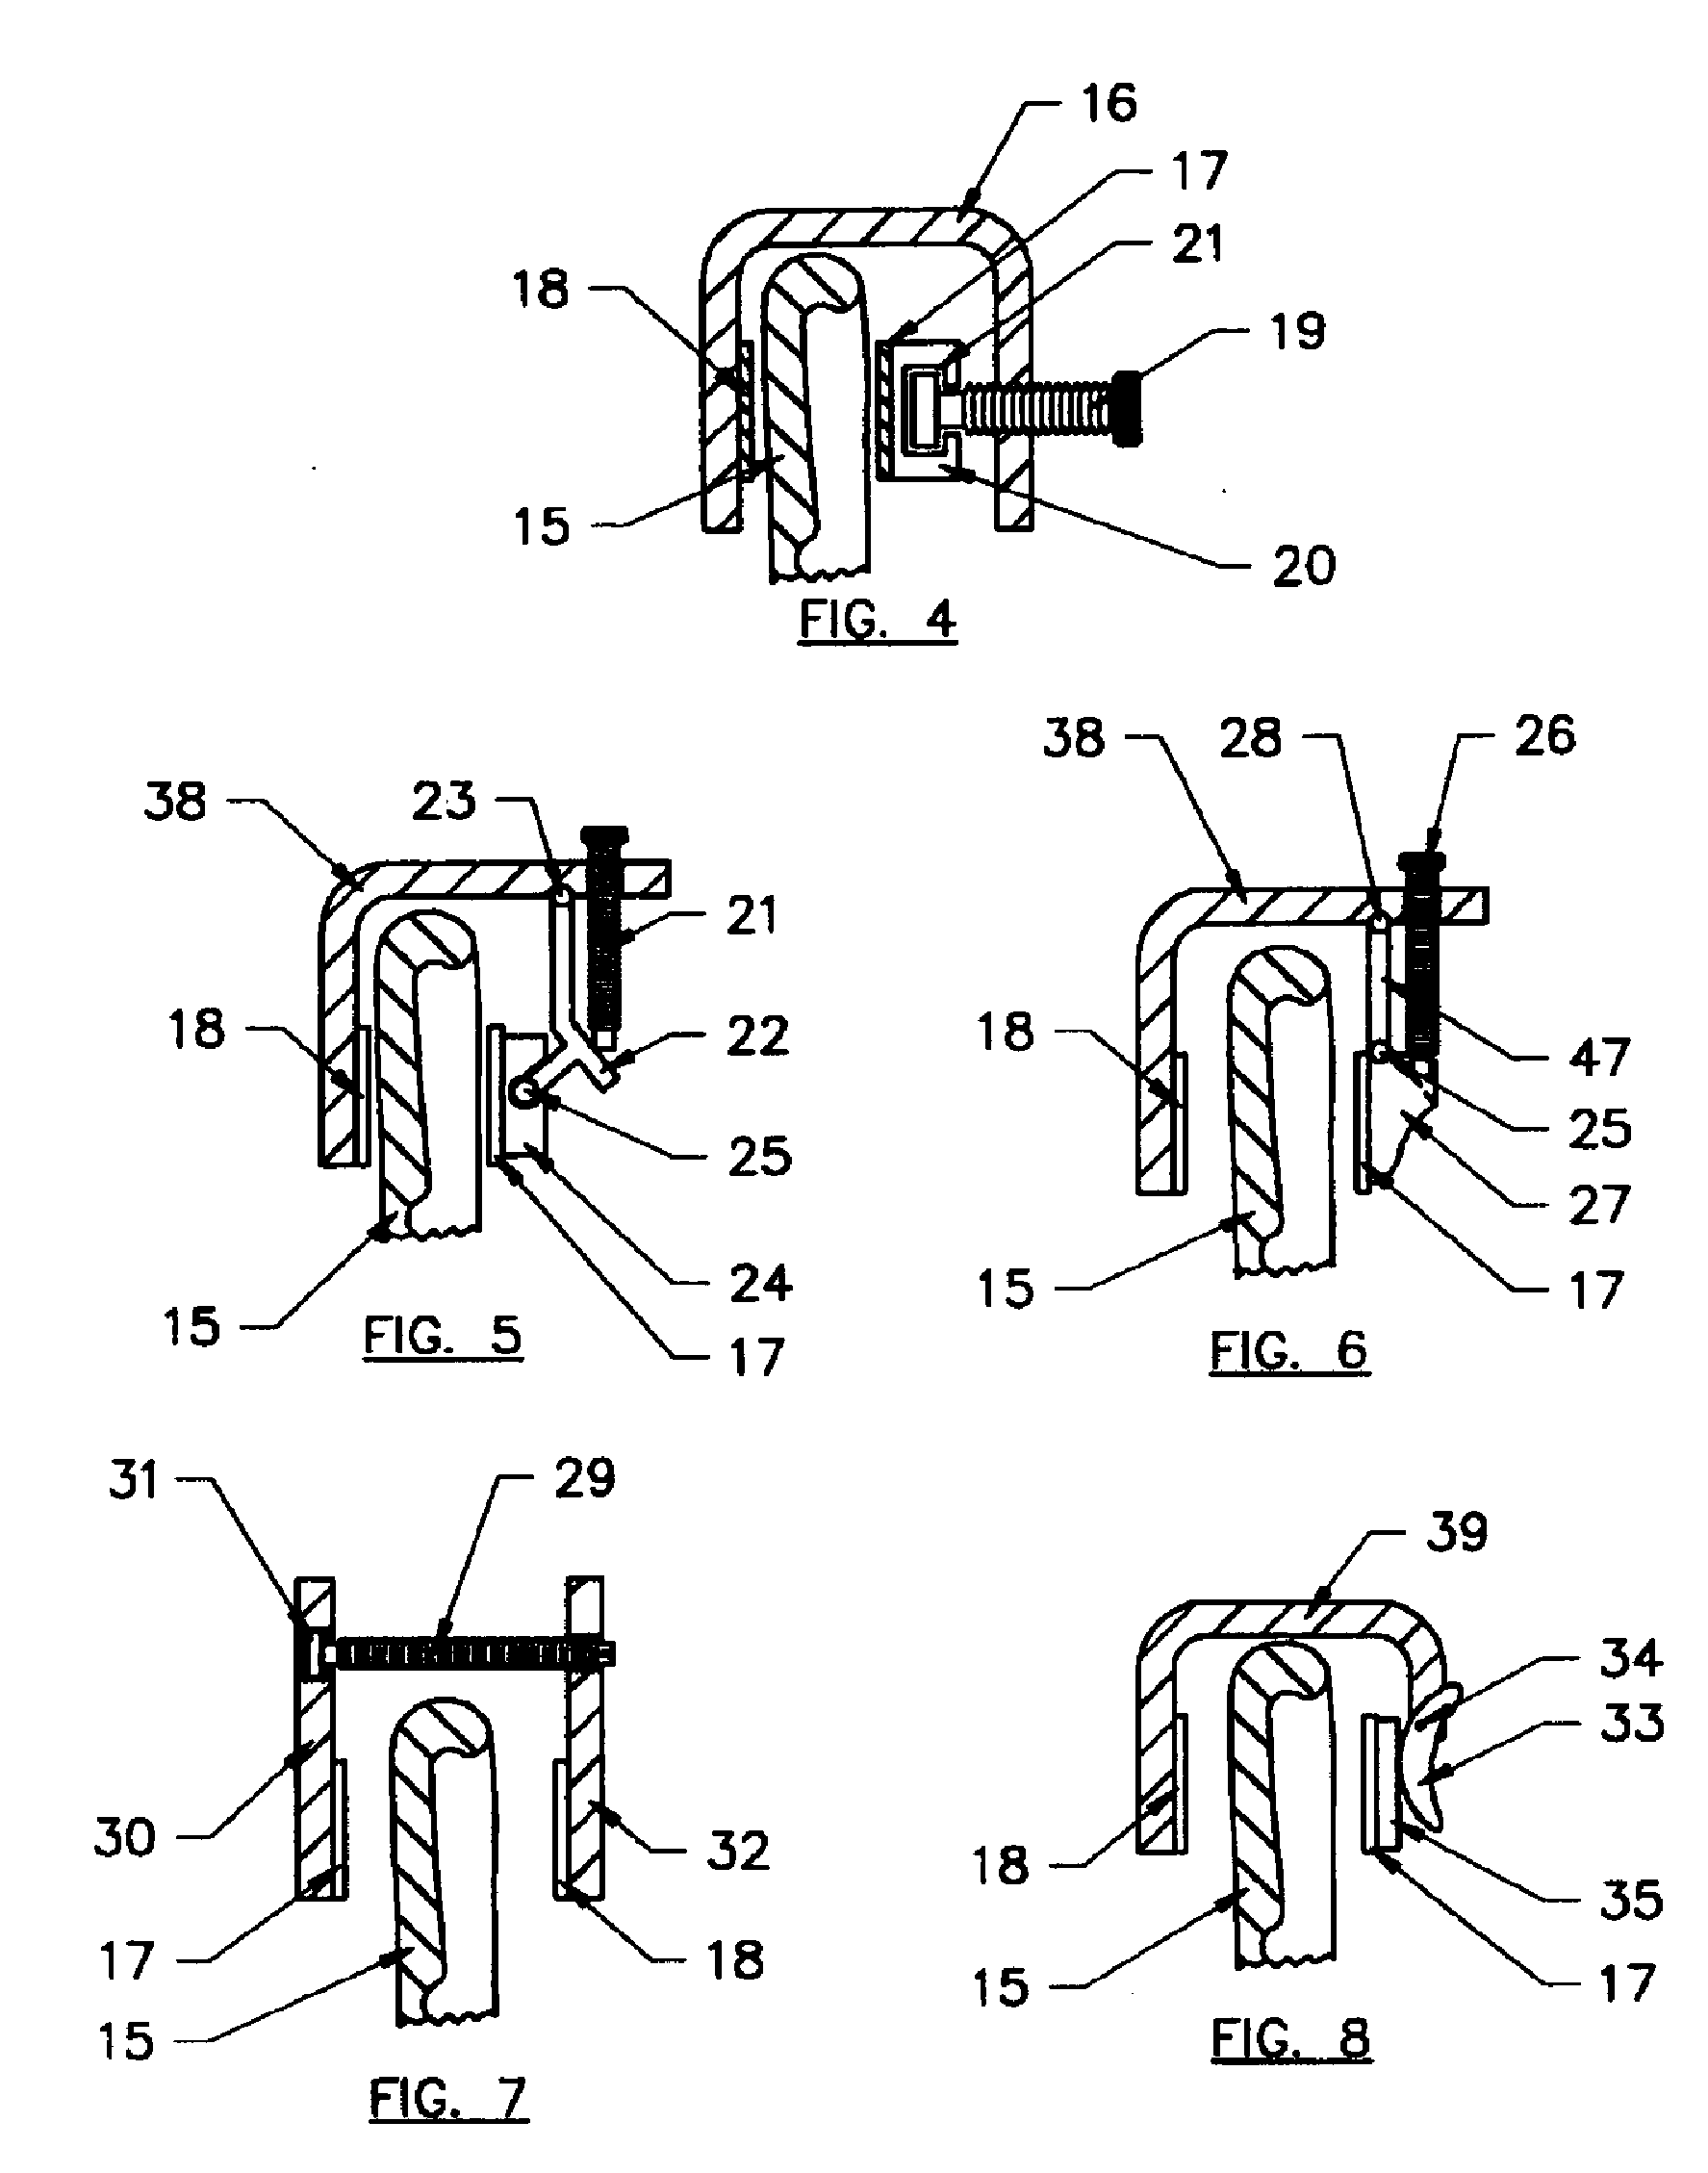 Device and Method for Treating Ear Injuries